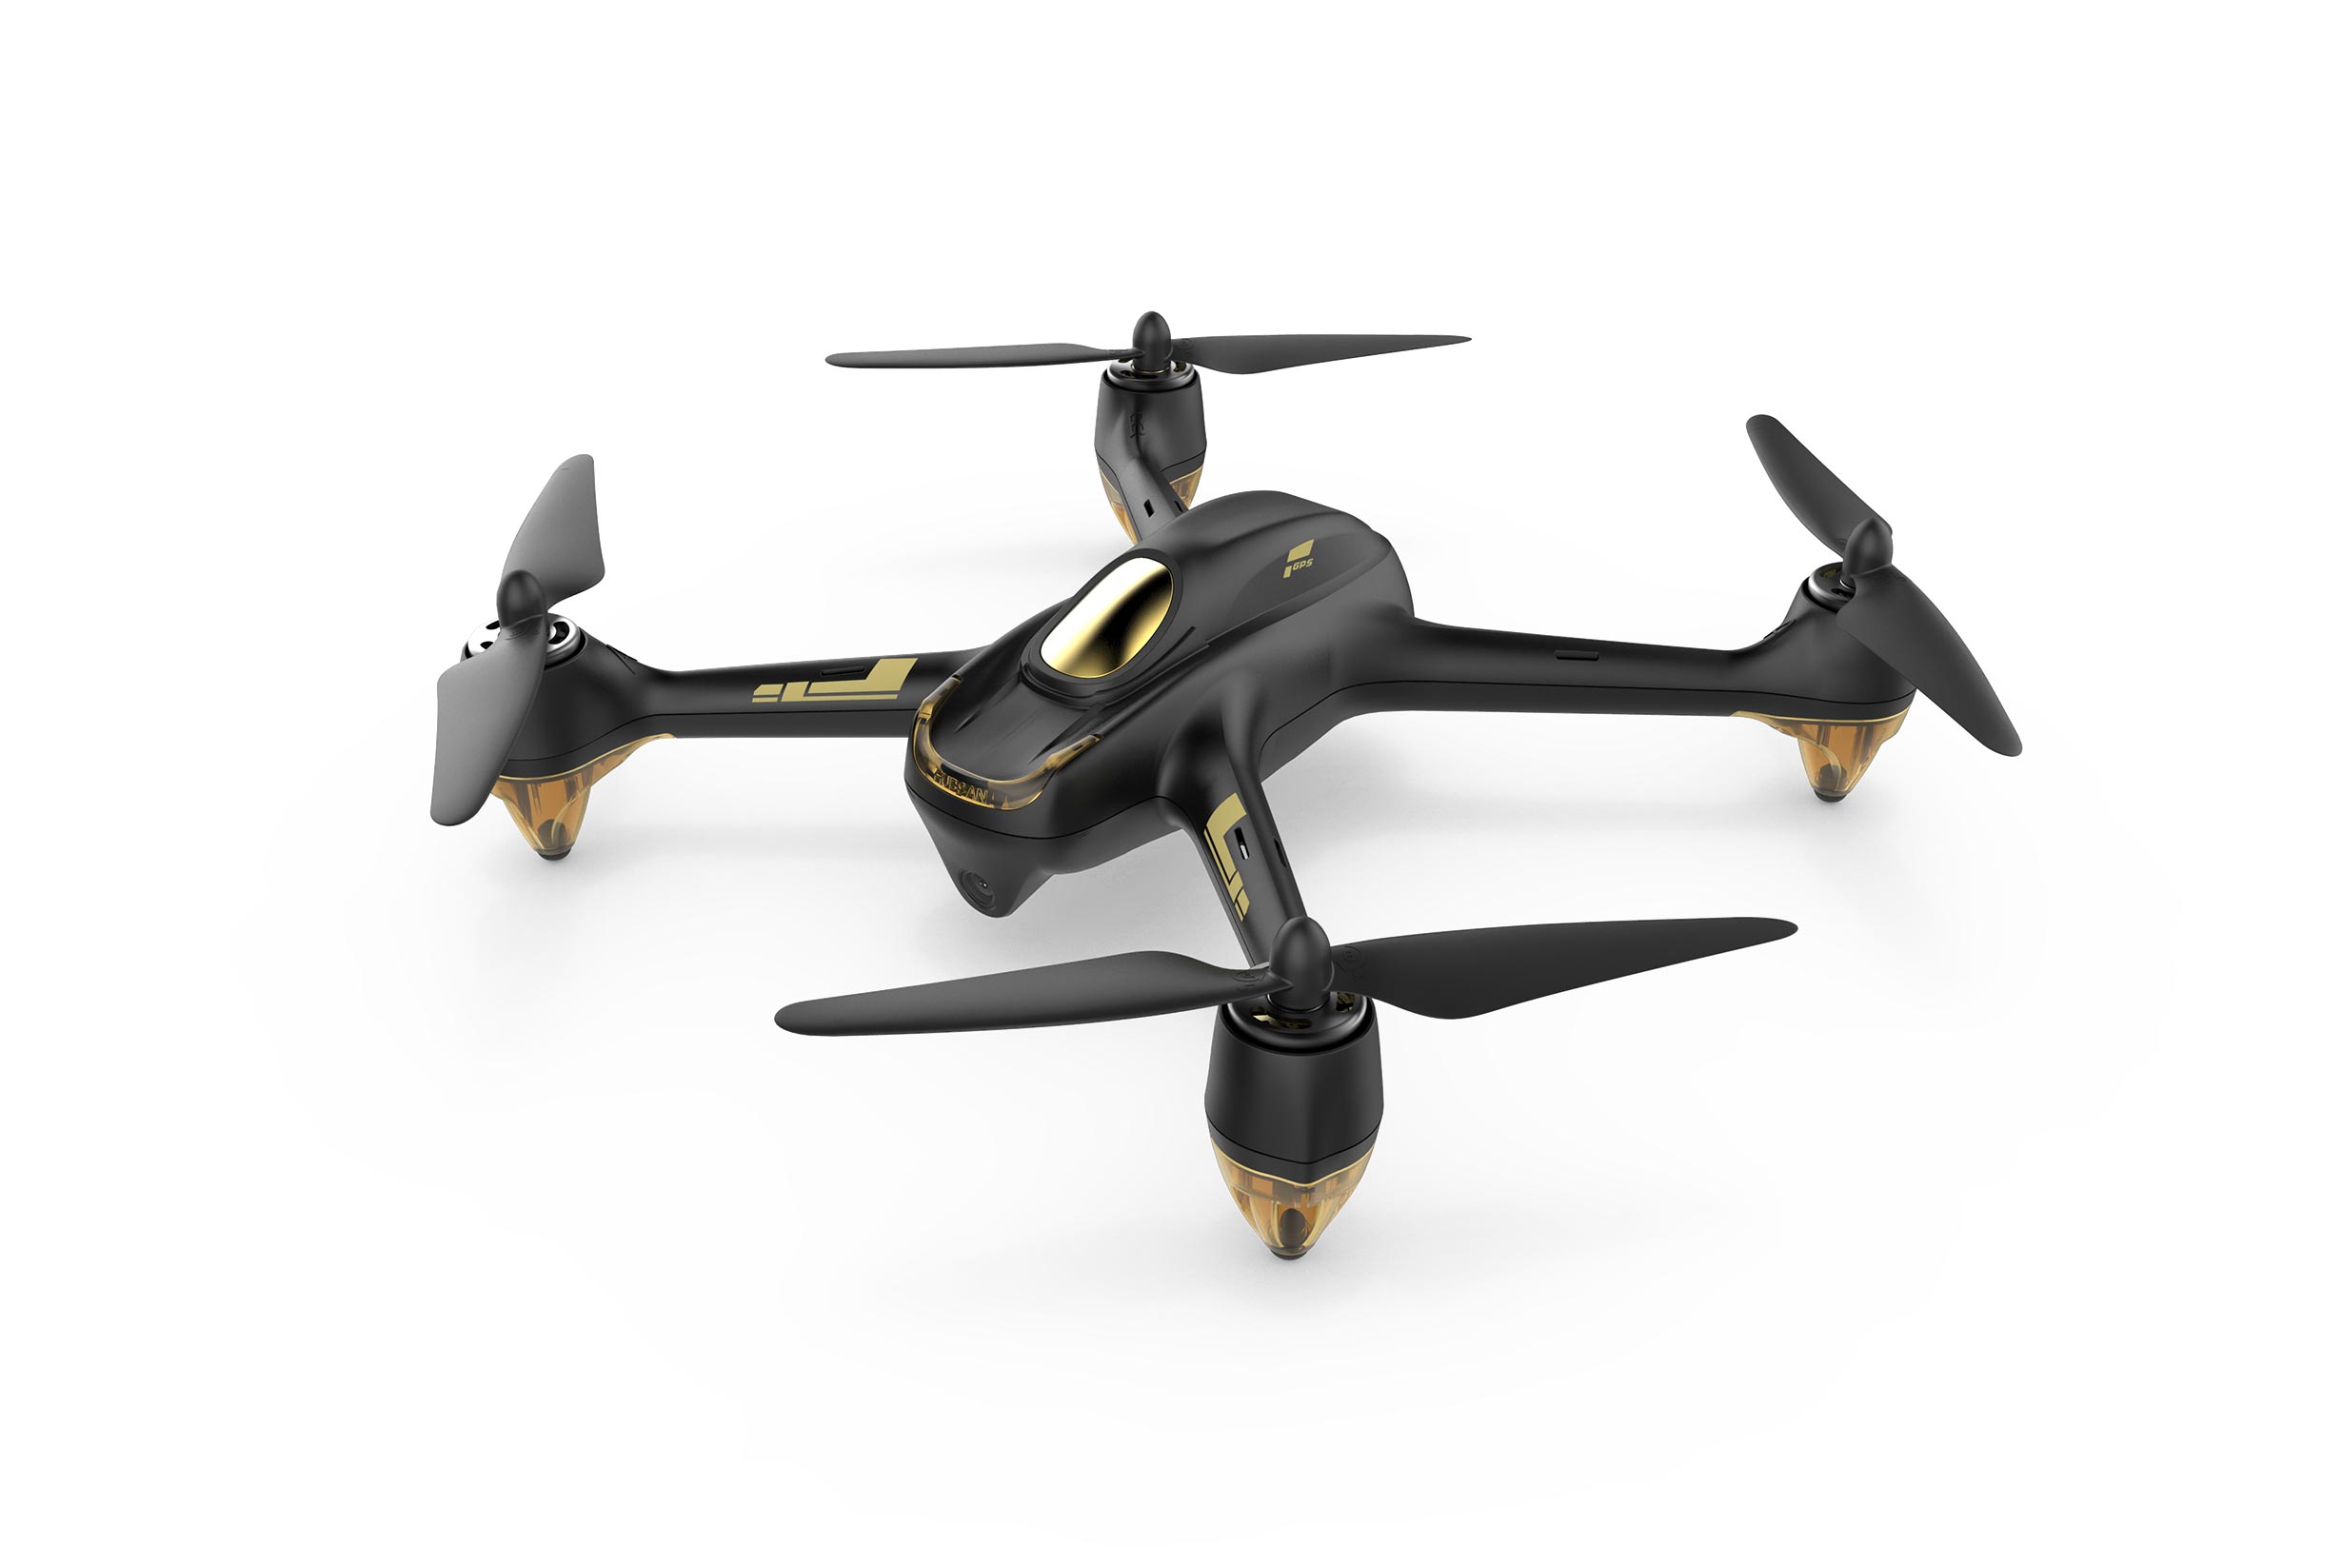 Hubsan H501S X4 Air 4 Channel GPS 5.8G FPV Brushless with 1080P HD Camera Follow-Me Mode RTH Function RC Quadcopter RTF Black & Gold